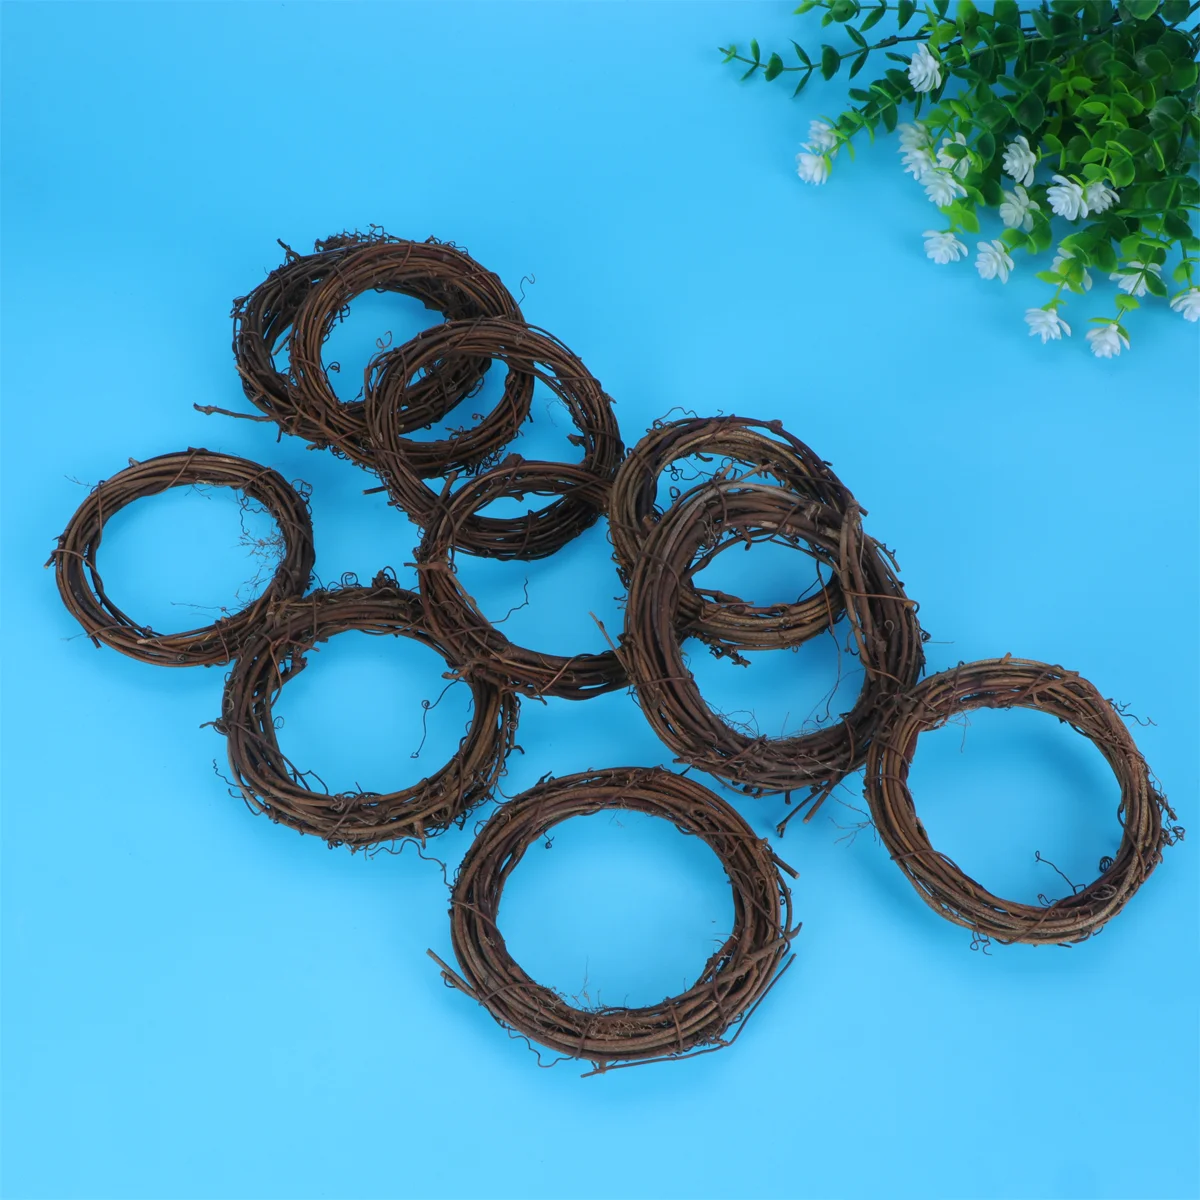 

Wreath Rattan Grapevine Ring Vine Diy Natural Christmas Wreaths Garland Crafts Twig Door Branch Dried Decorative Twigs Party